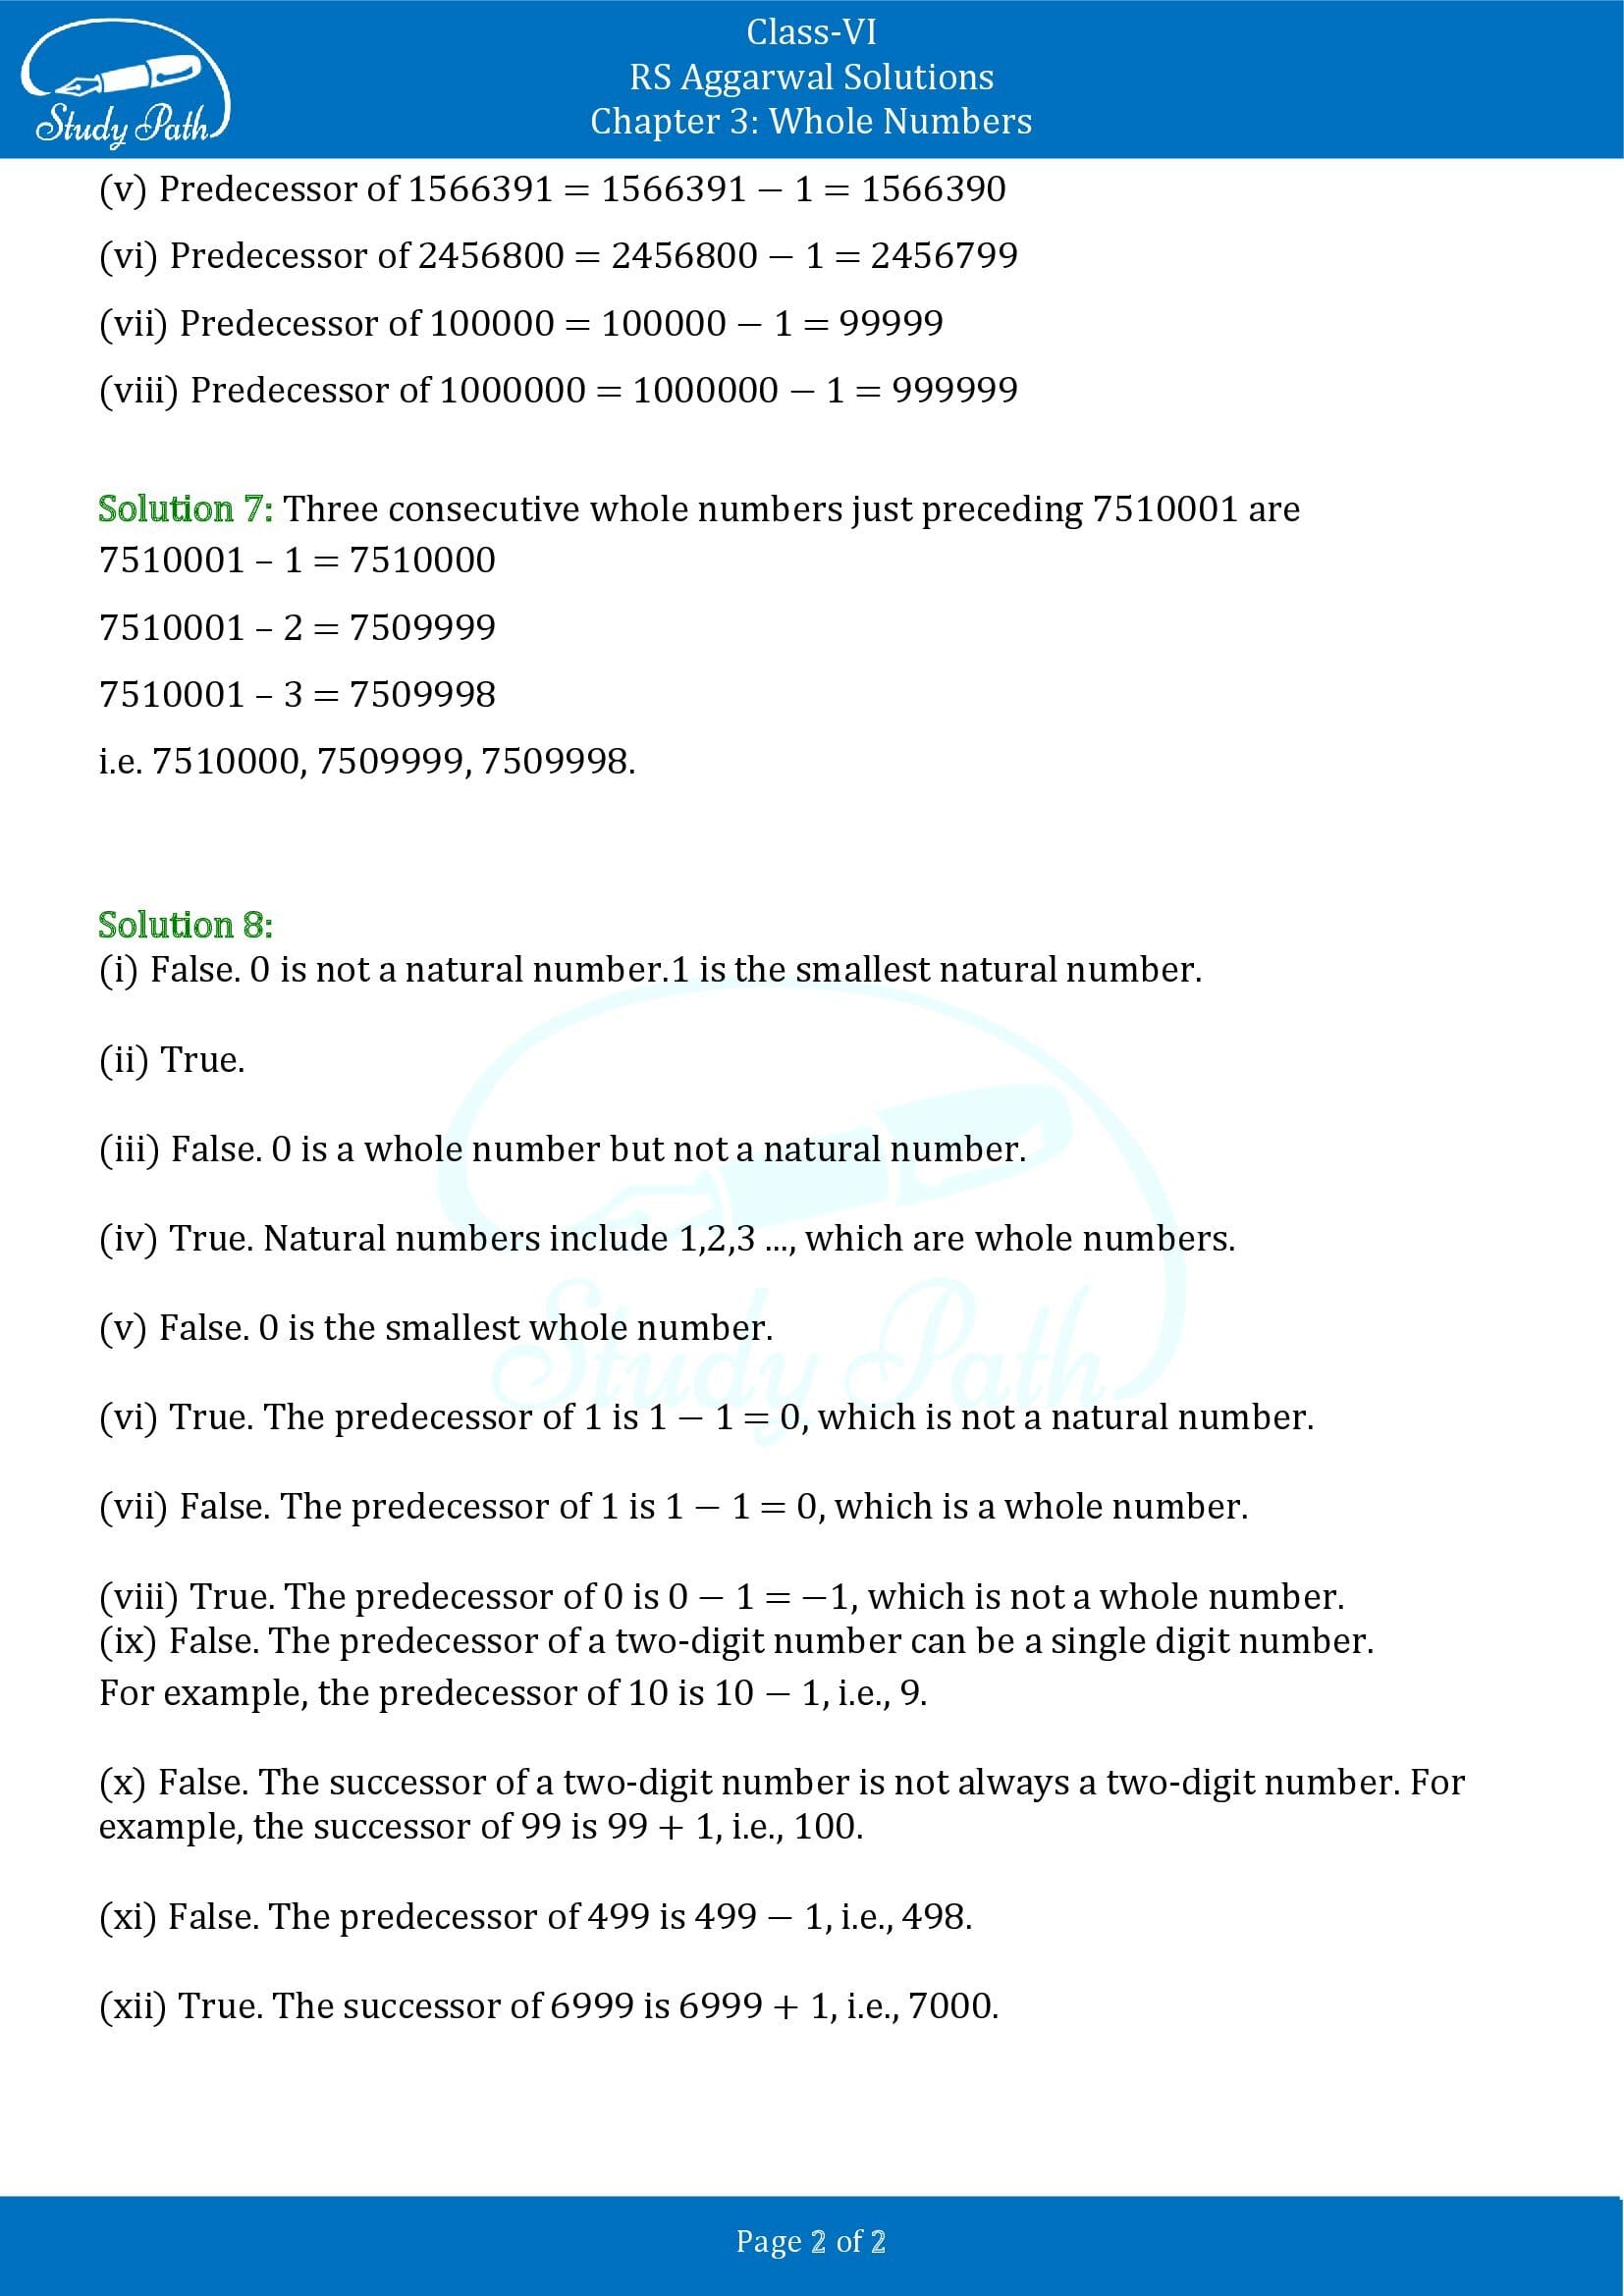 RS Aggarwal Solutions Class 6 Chapter 3 Whole Numbers Exercise 3A 00002